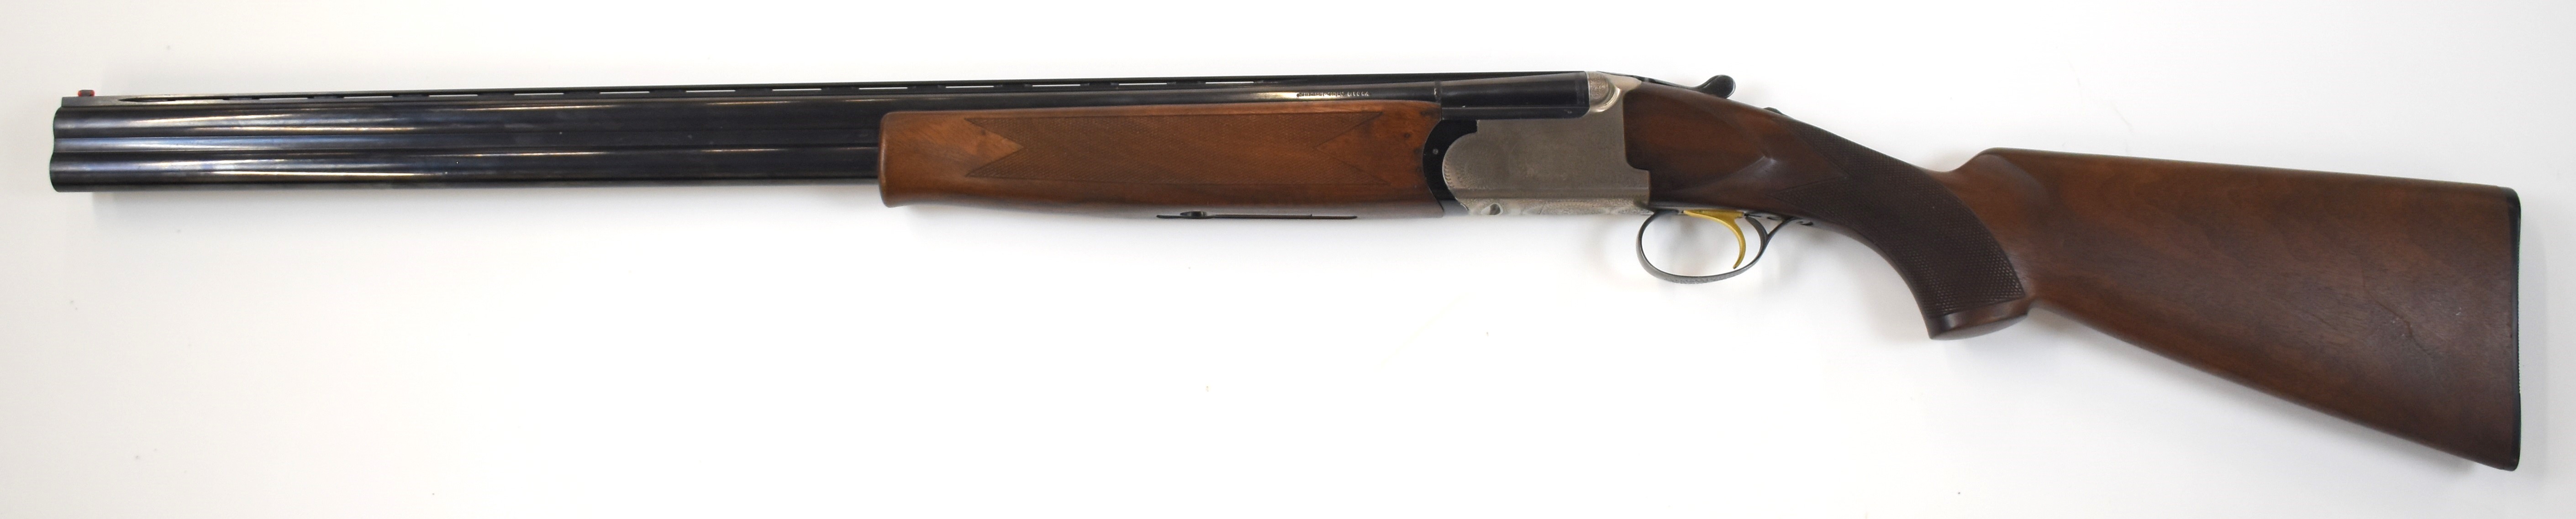 Parker-Hale 12 bore over and under ejector shotgun with named and engraved lock, engraved trigger - Image 10 of 10